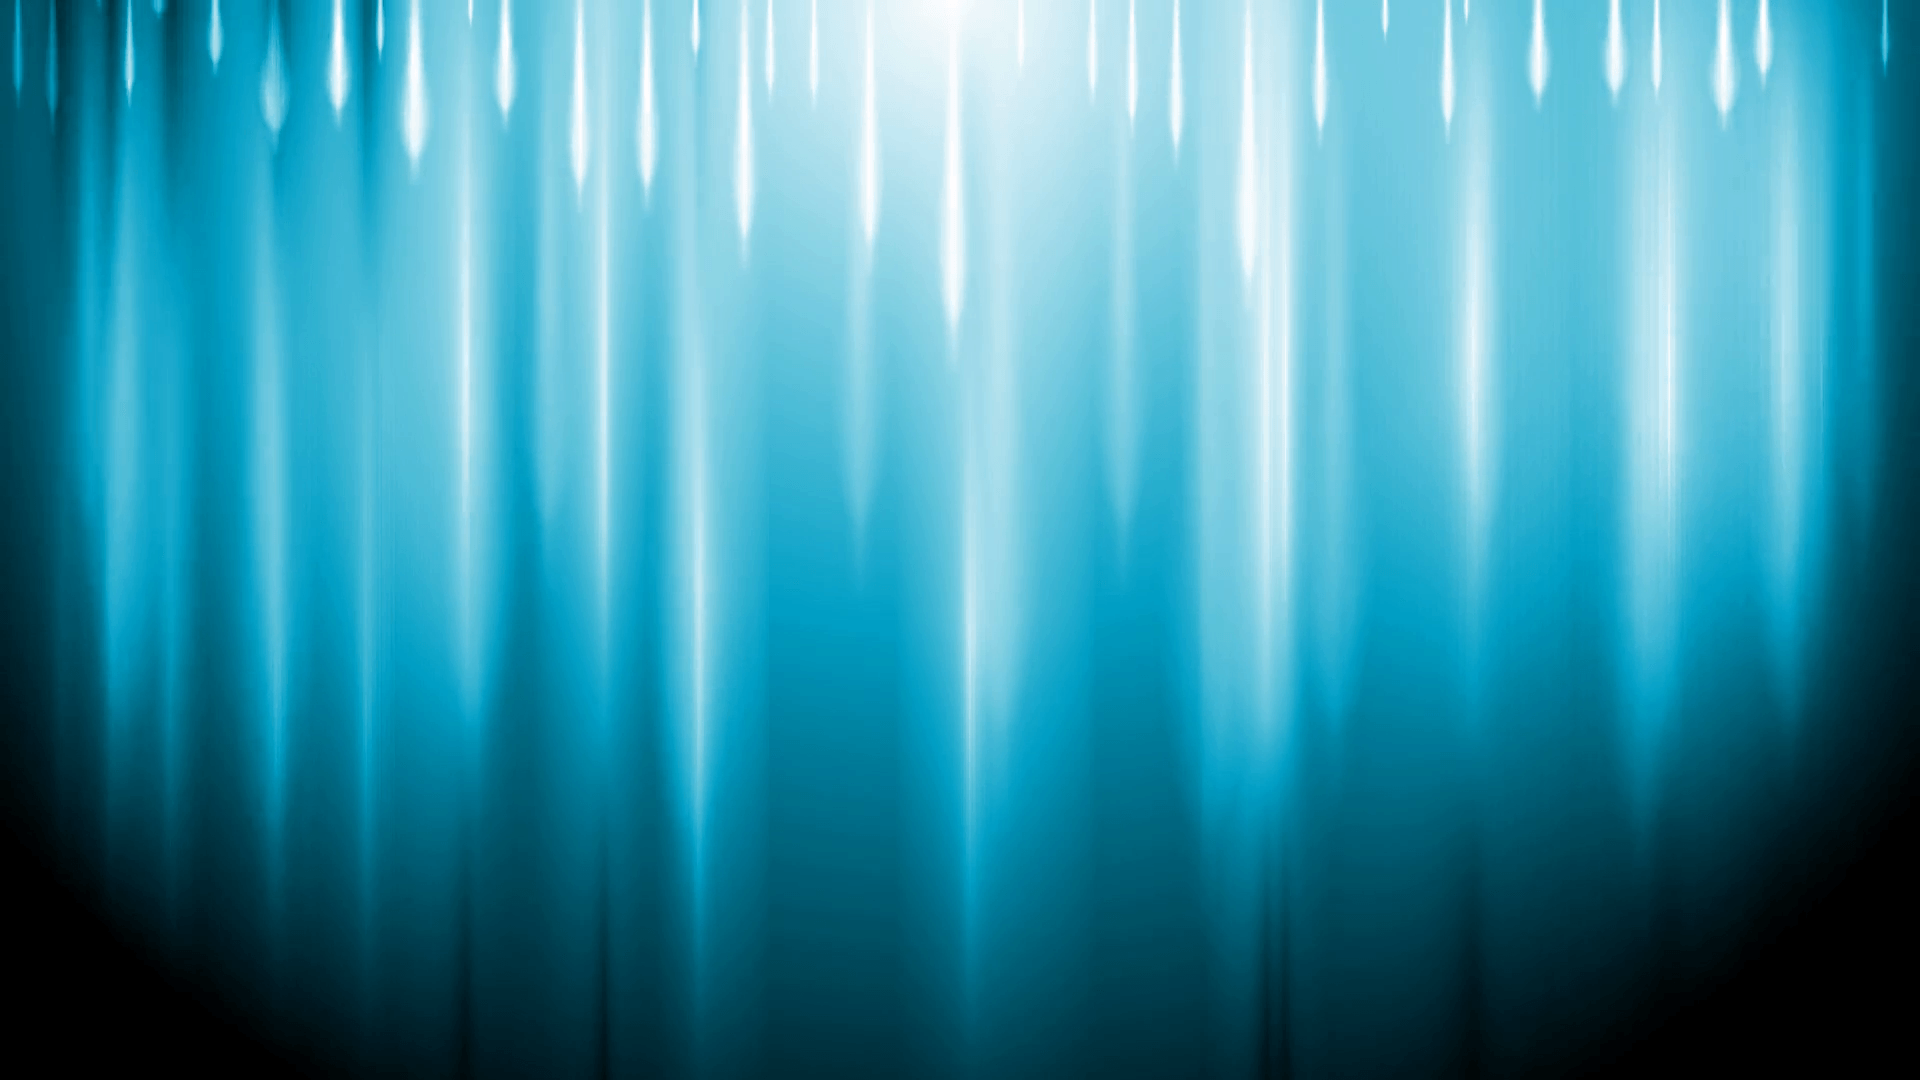 Graphic Design Backgrounds - Wallpaper Cave